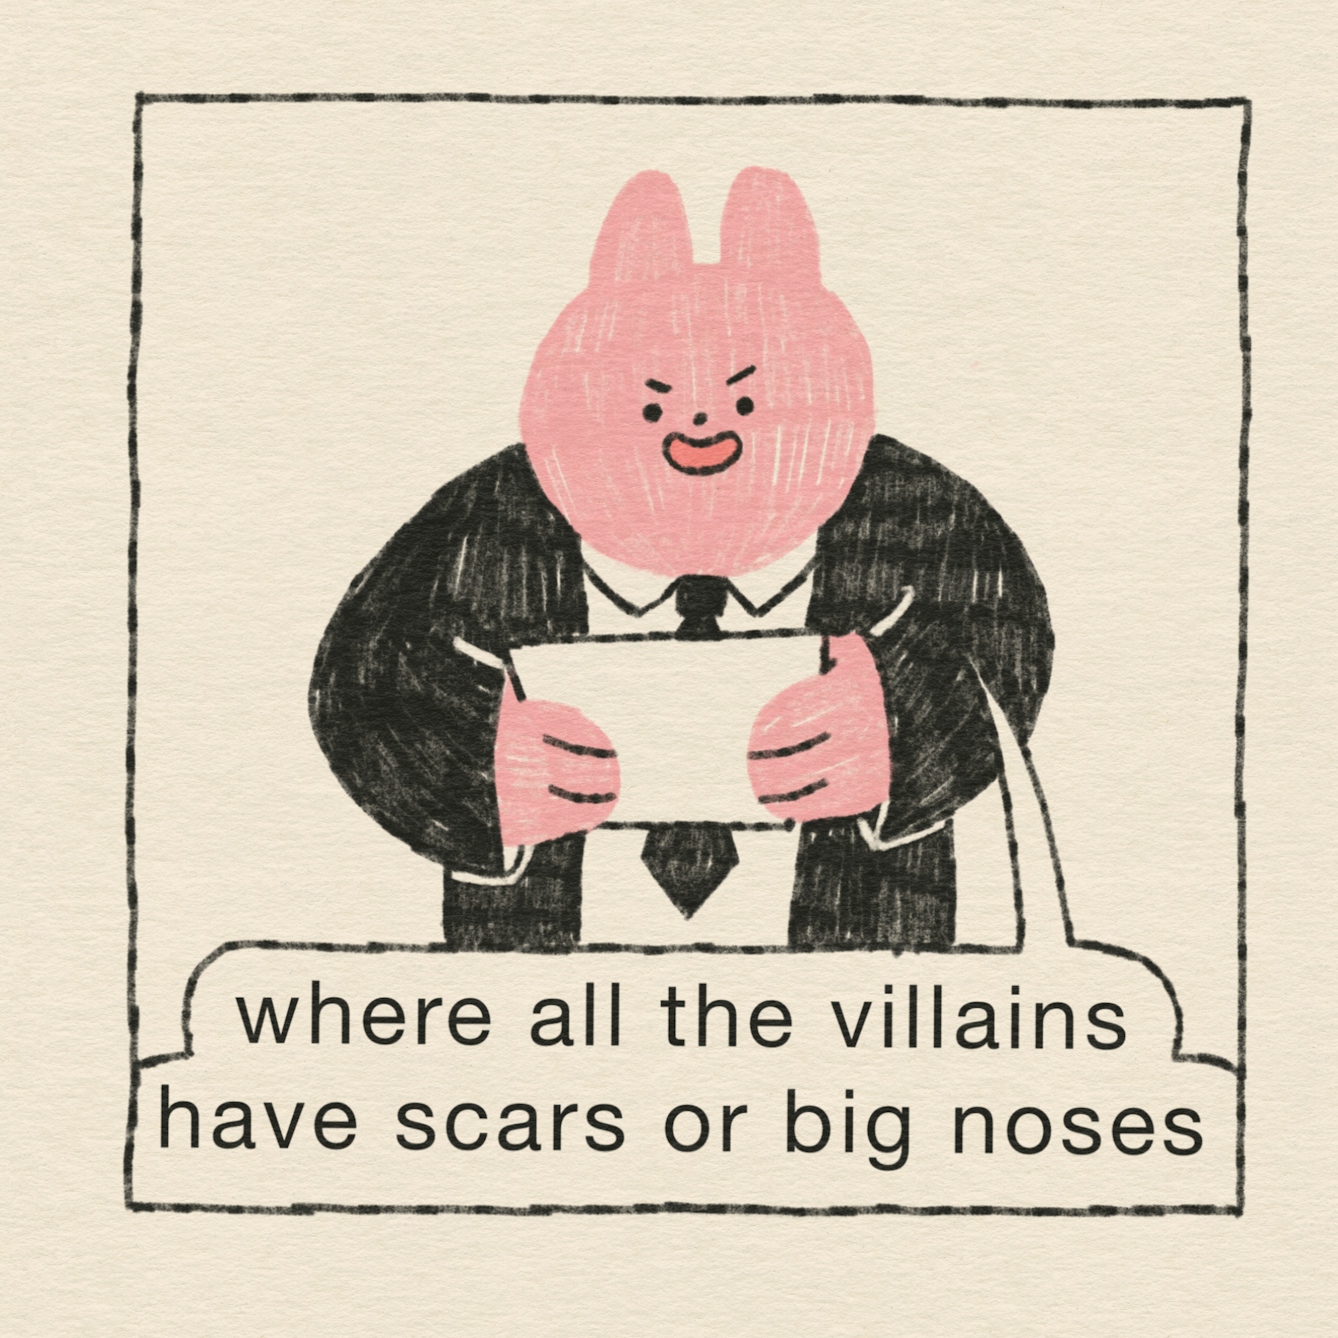 In panel 3, the rabbit continues his pitch. “Where all the villains have scars or big noses,” he says with a laugh. 